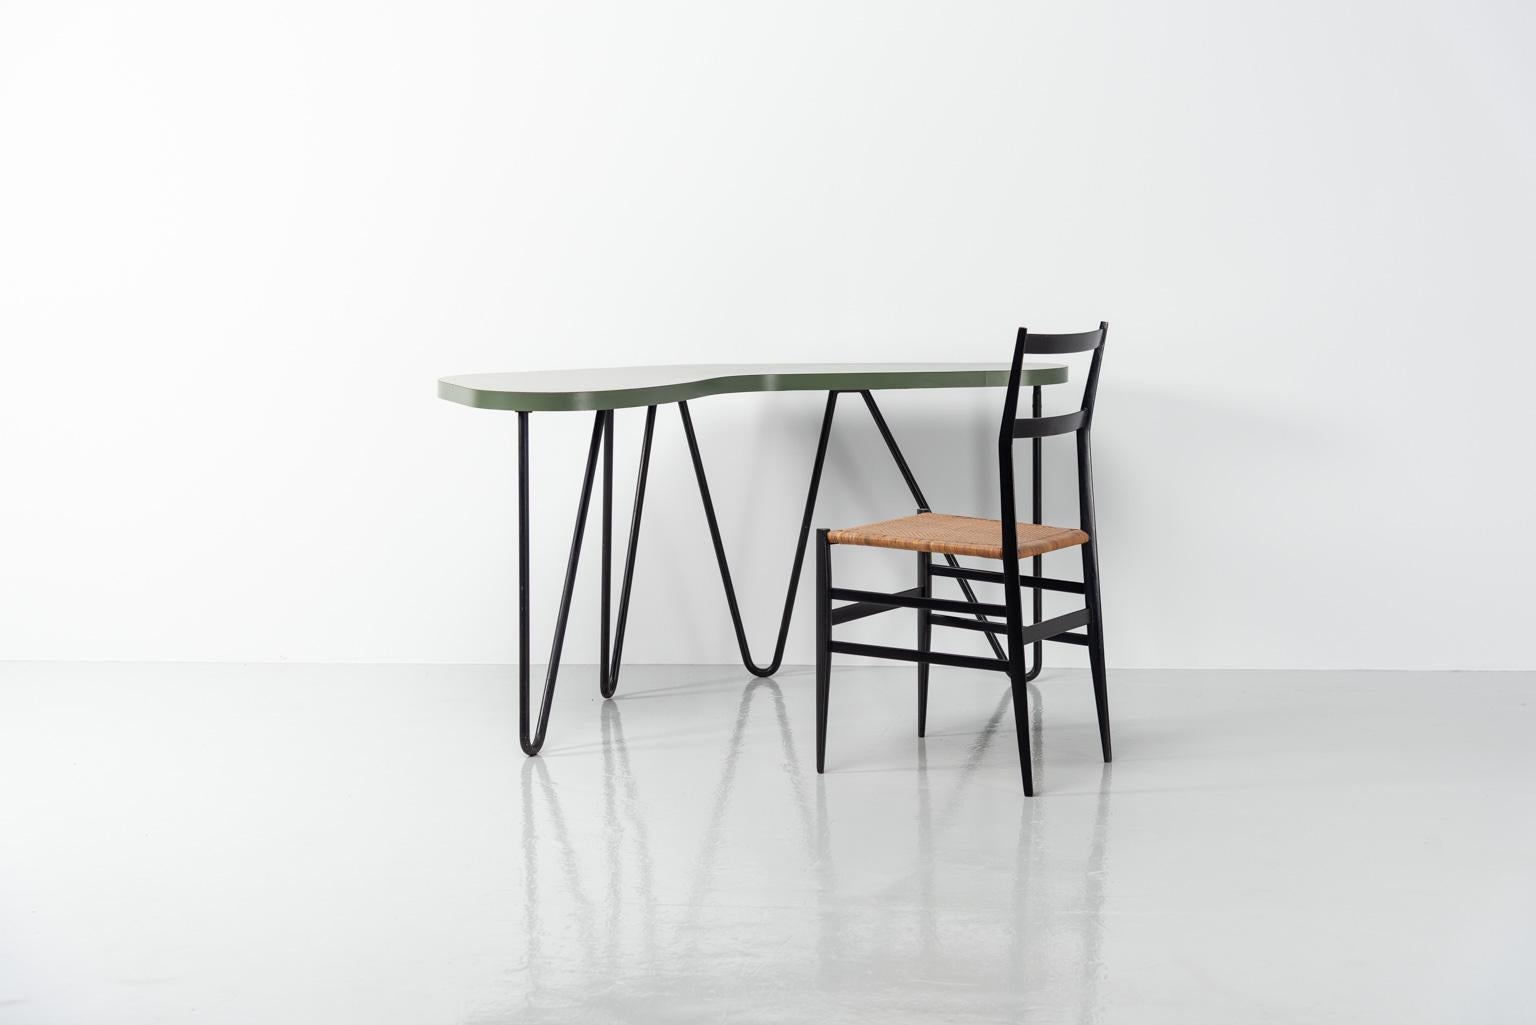 Beautiful kidney shaped writing table by unknown designer in the style of Jean Royere and Jacques Hitier, made in France 1950. The desk is made of a black painted tubular frame and the top is made of green laminated wood. The zigzag tubular metal